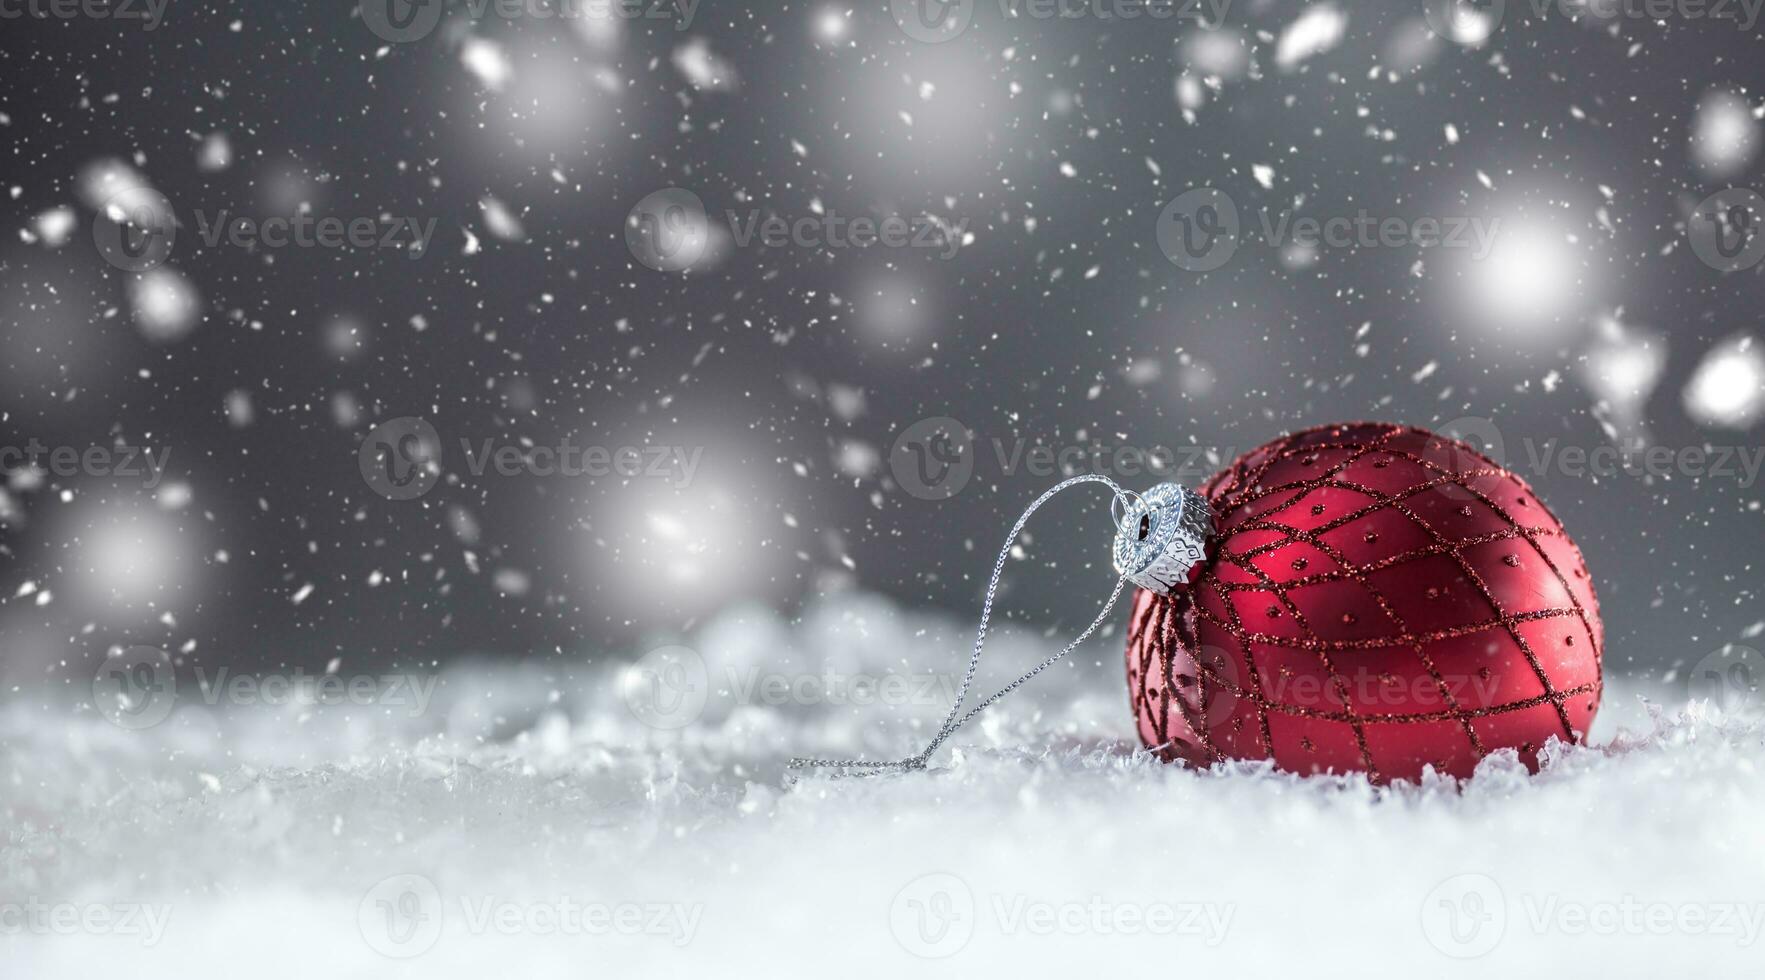 Christmas red Luxury ball in snow and abstract snowy atmosphere photo